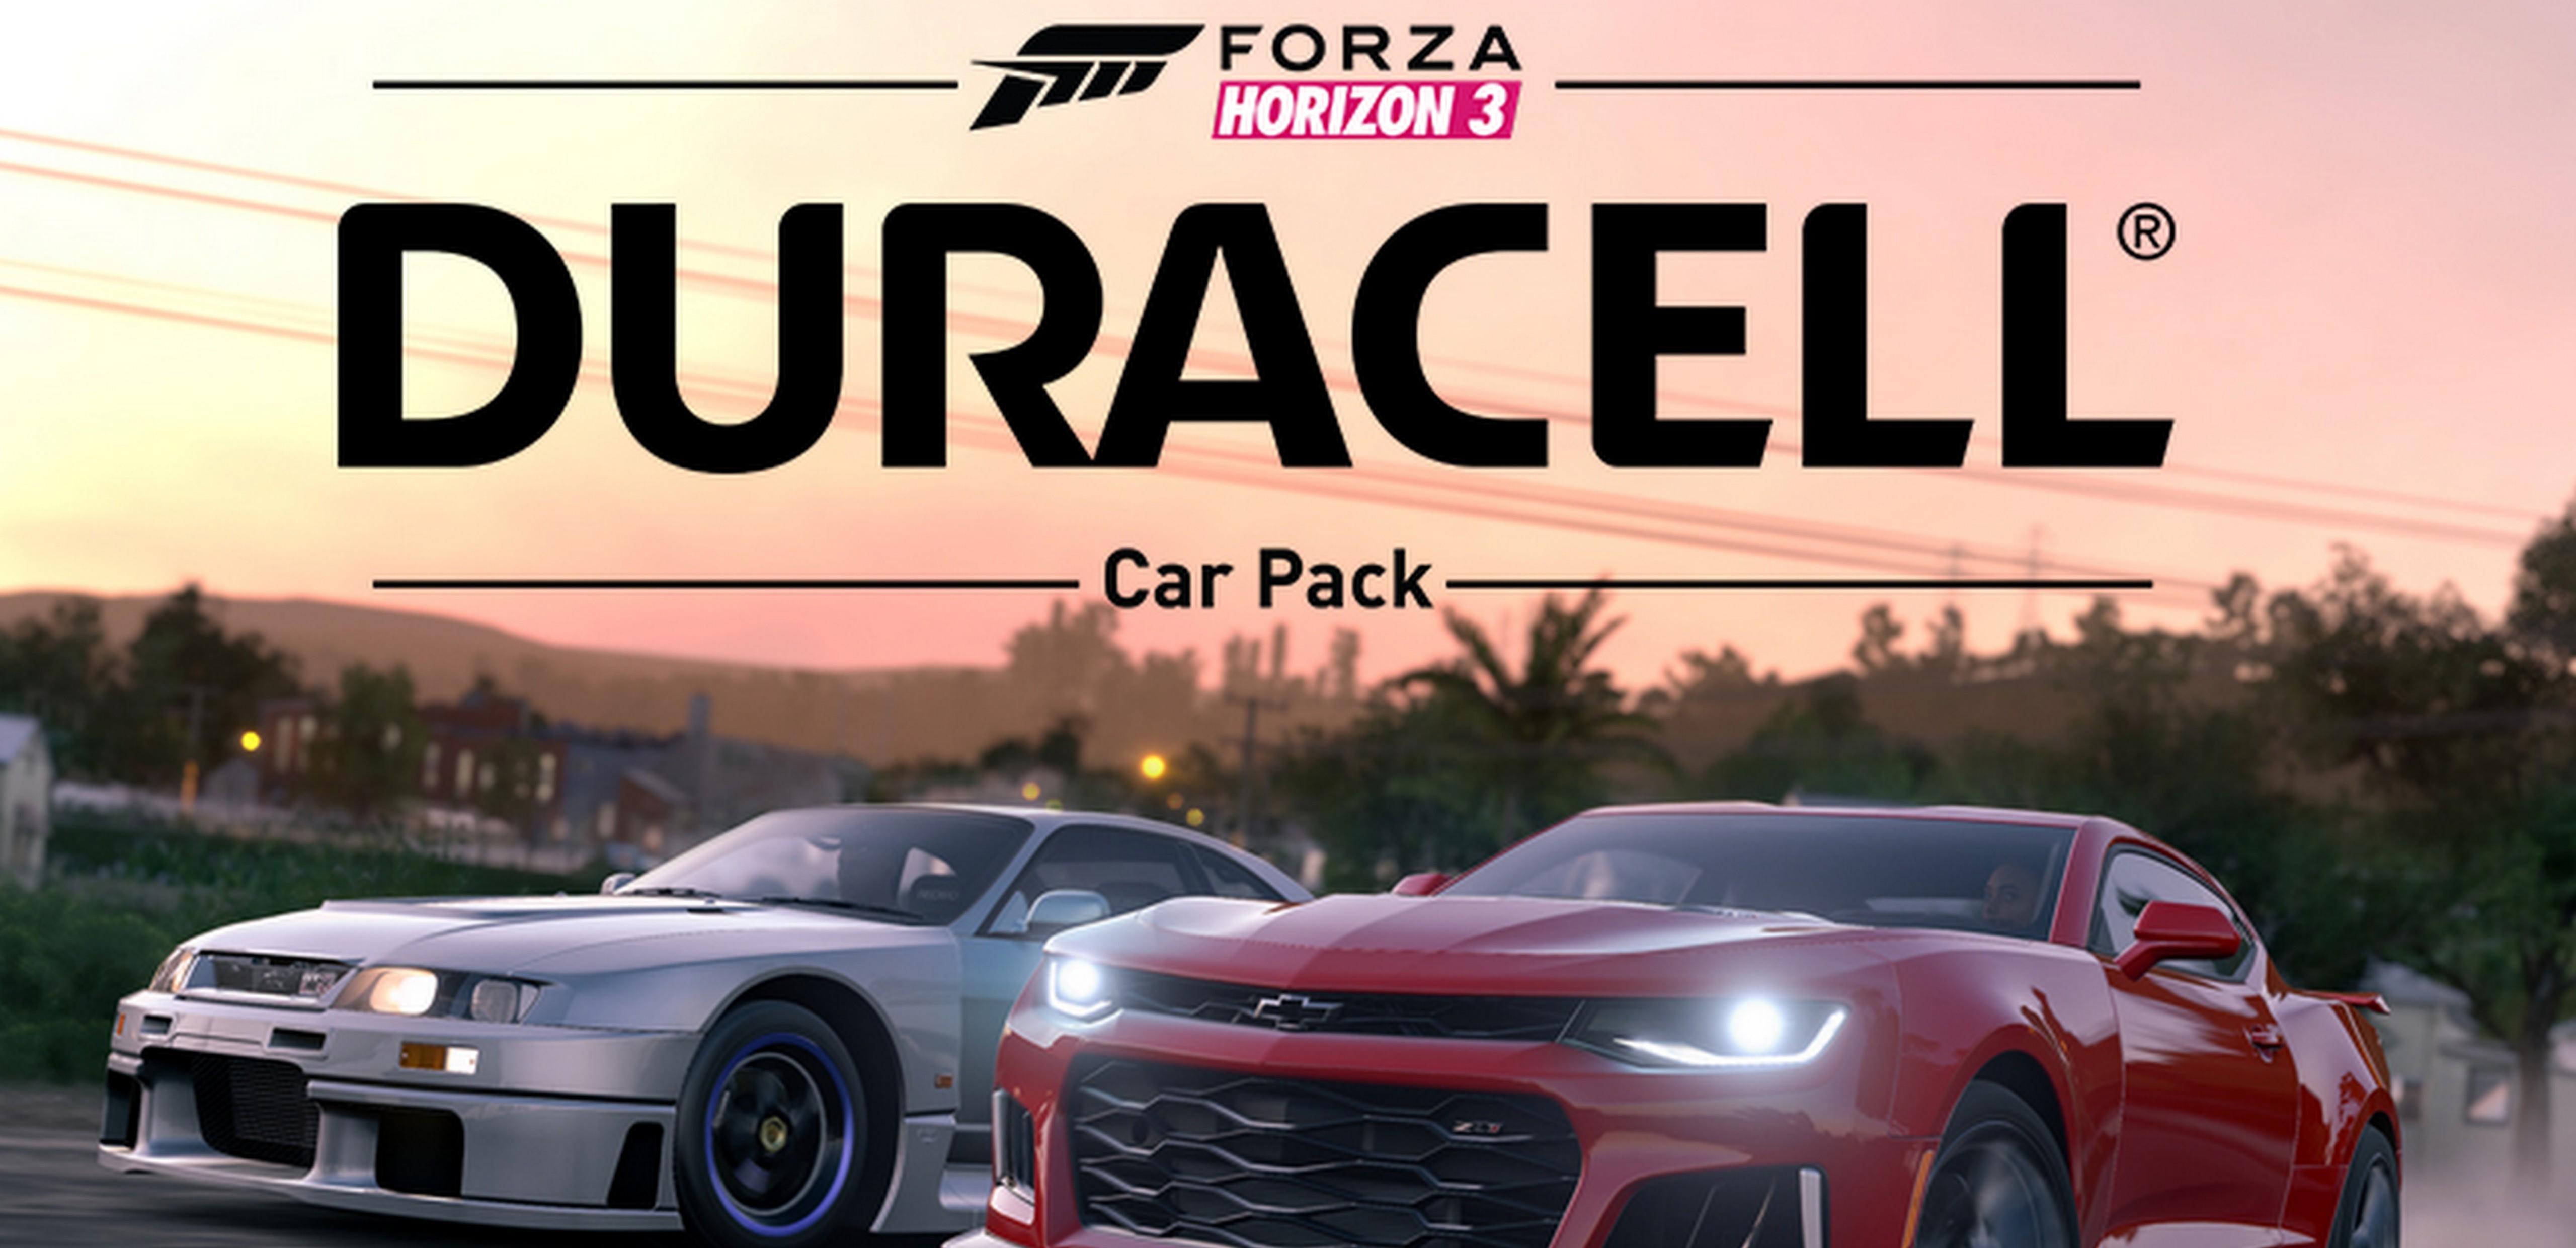 Duracell Car Pack and new TAMO Racemo car arrive in Forza Horizon 3